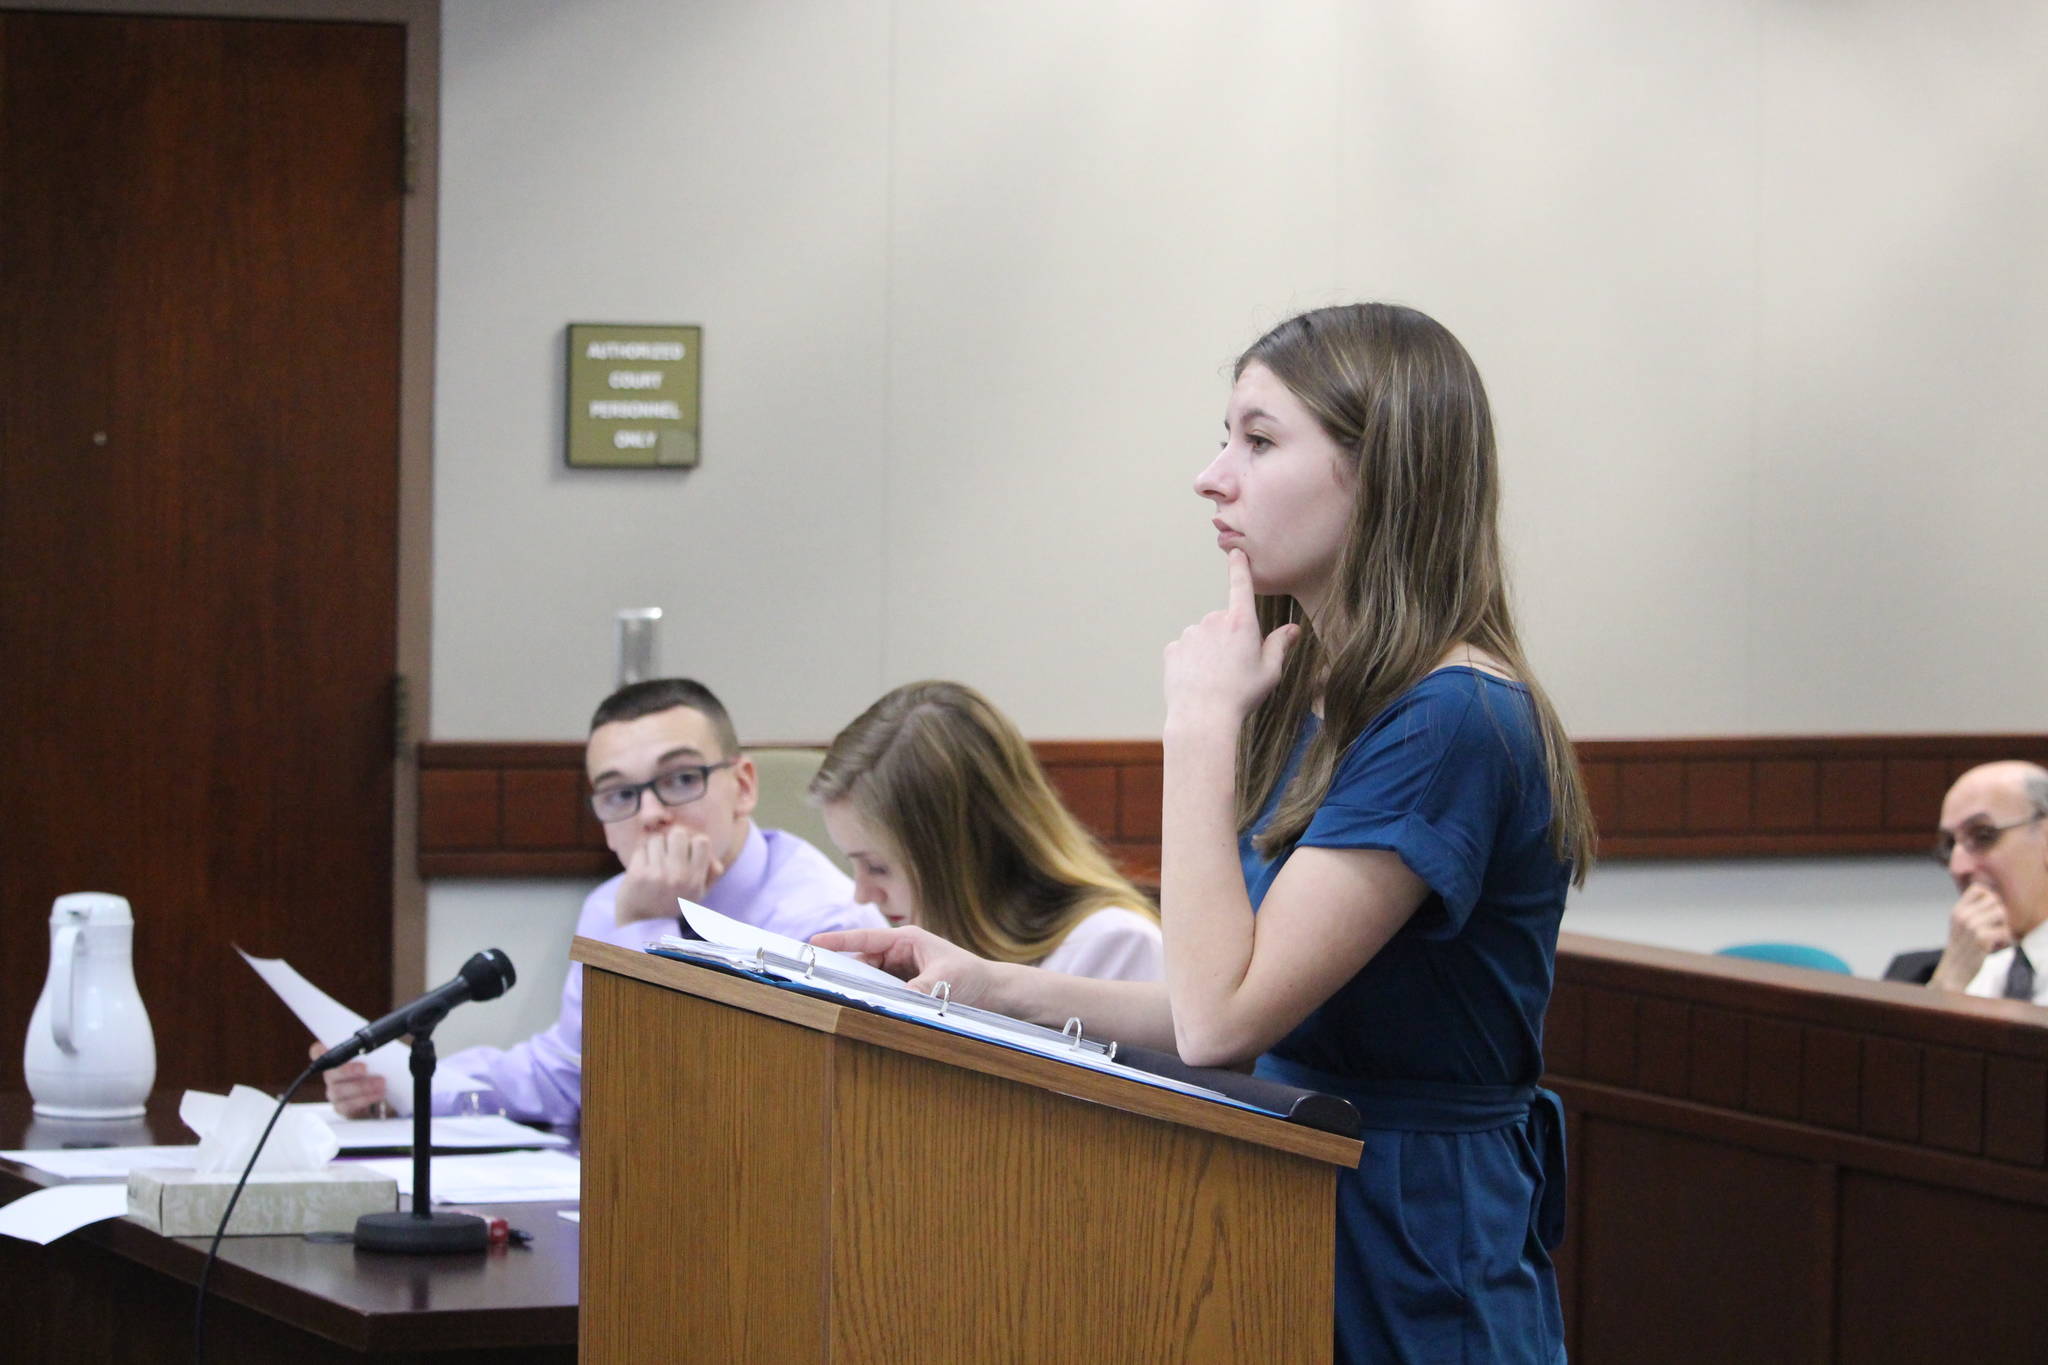 Nikiski Middle/High School senior America Jeffreys, in her role as defense attorney, questions a witness during a mock trial at the Kenai Courthouse on Dec. 3, 2019. (Photo by Brian Mazurek/Peninsula Clarion)